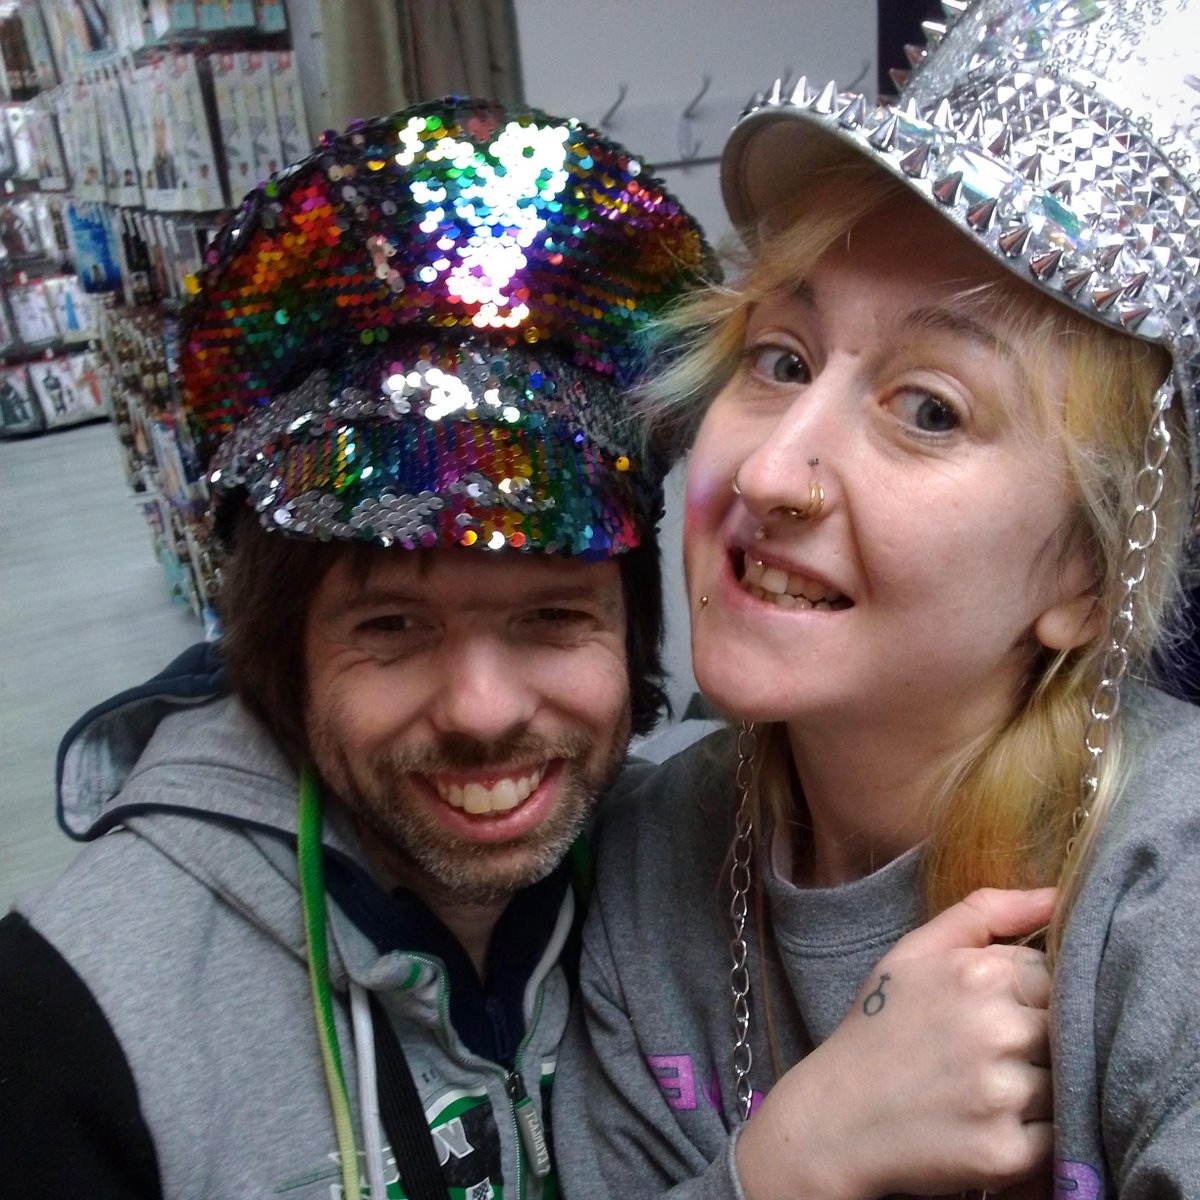 Ben and Paris had some daft fun exploring Leeds last week. They tried on some silly costumes at a fancy dress shop, smelled the different soaps in @LushLtd and serenaded (ahem) the crowds at @LeedsMarkets 🚶‍♂️🎩🧼👨‍🎤 #autism #inclusion #Leeds